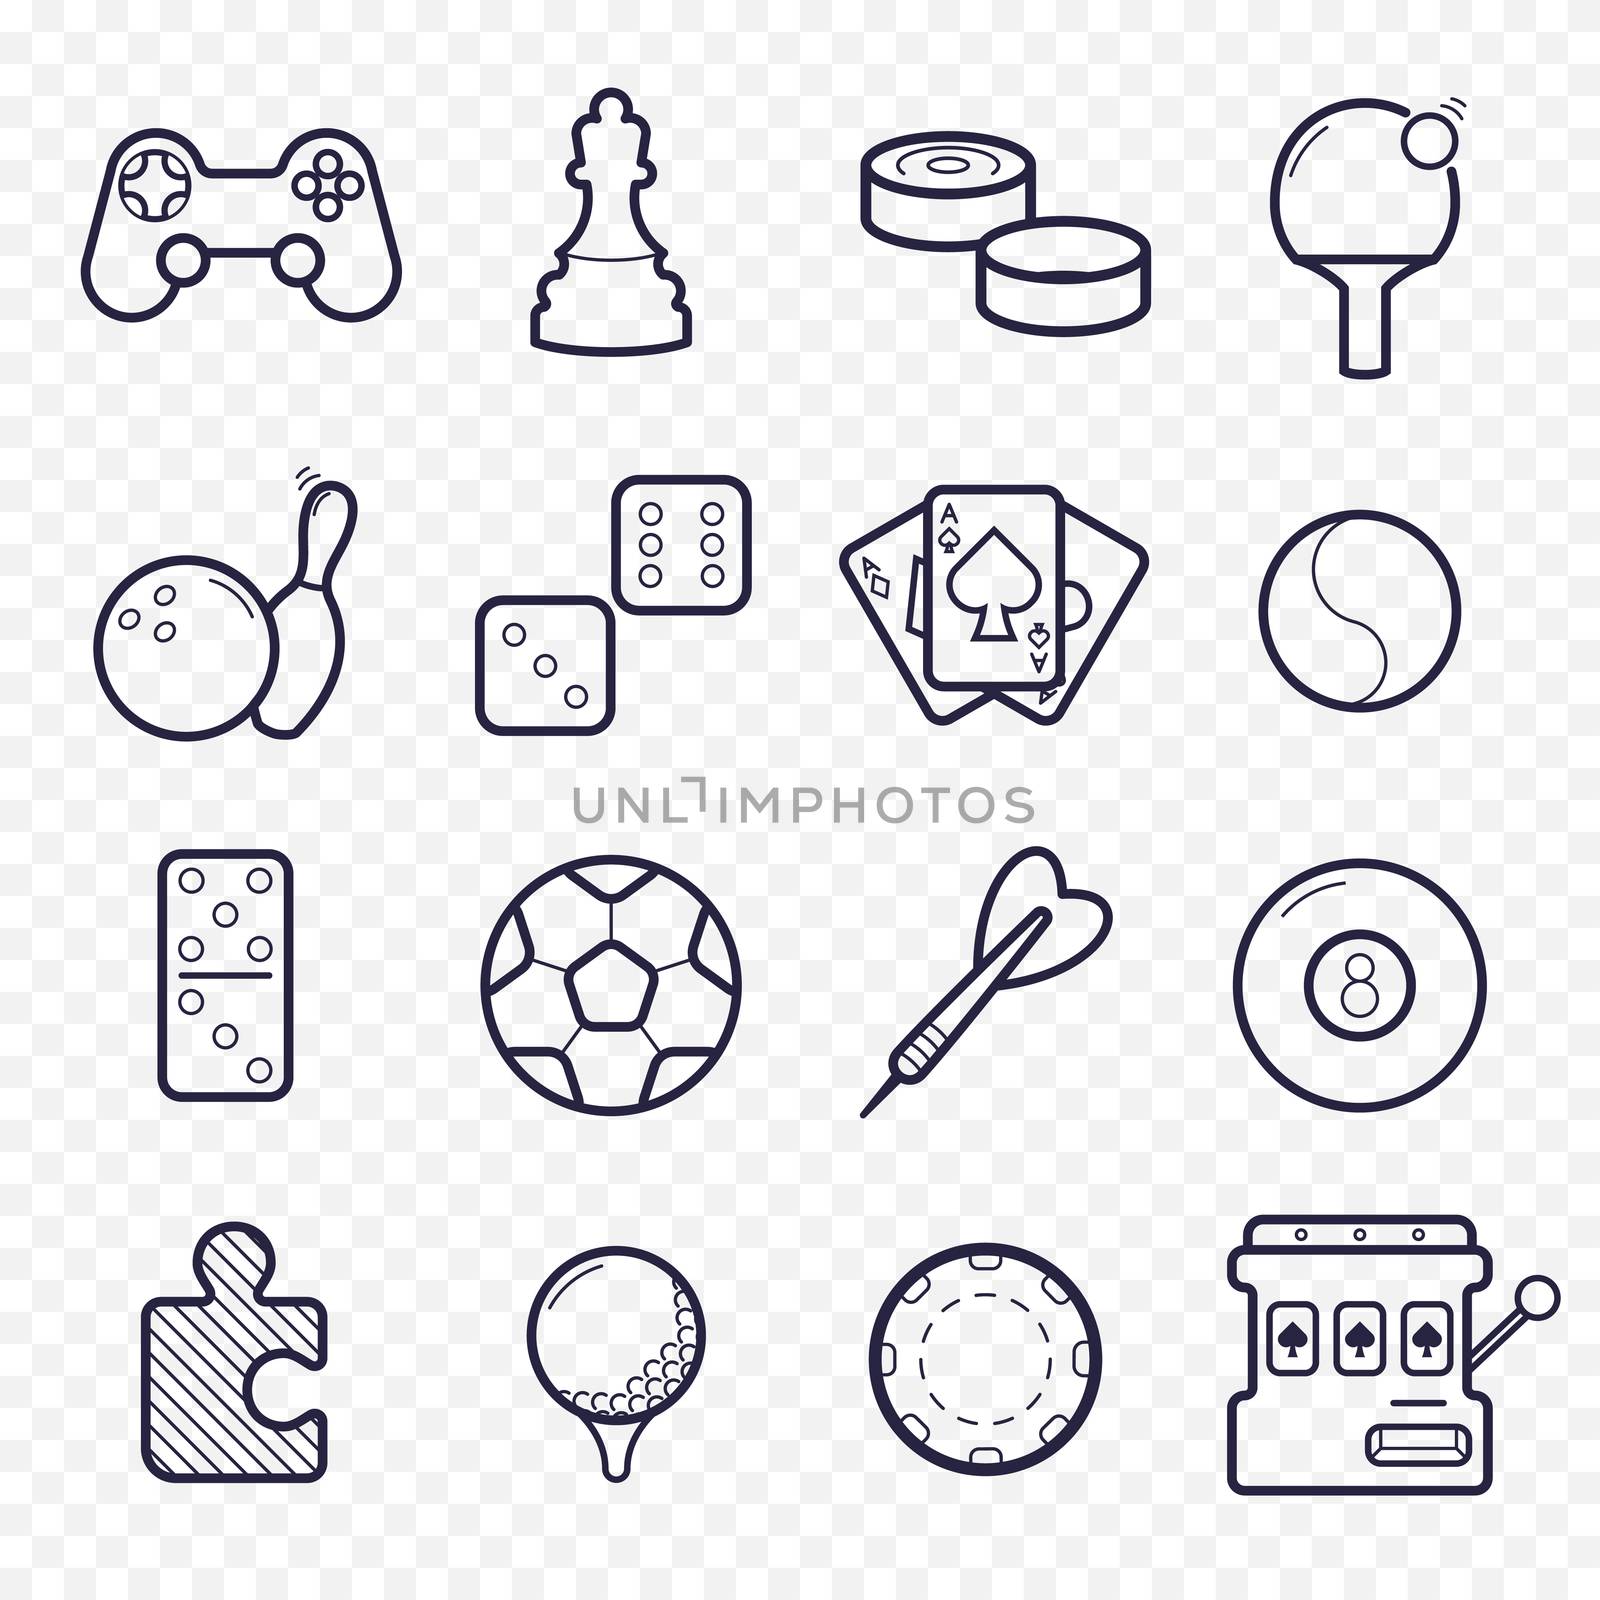 Games, videogames linear icons. Ping-pong, chess, golf, billiards, darts, gambling, and other leisure activities. Logic, gambling, sports thin line icons.